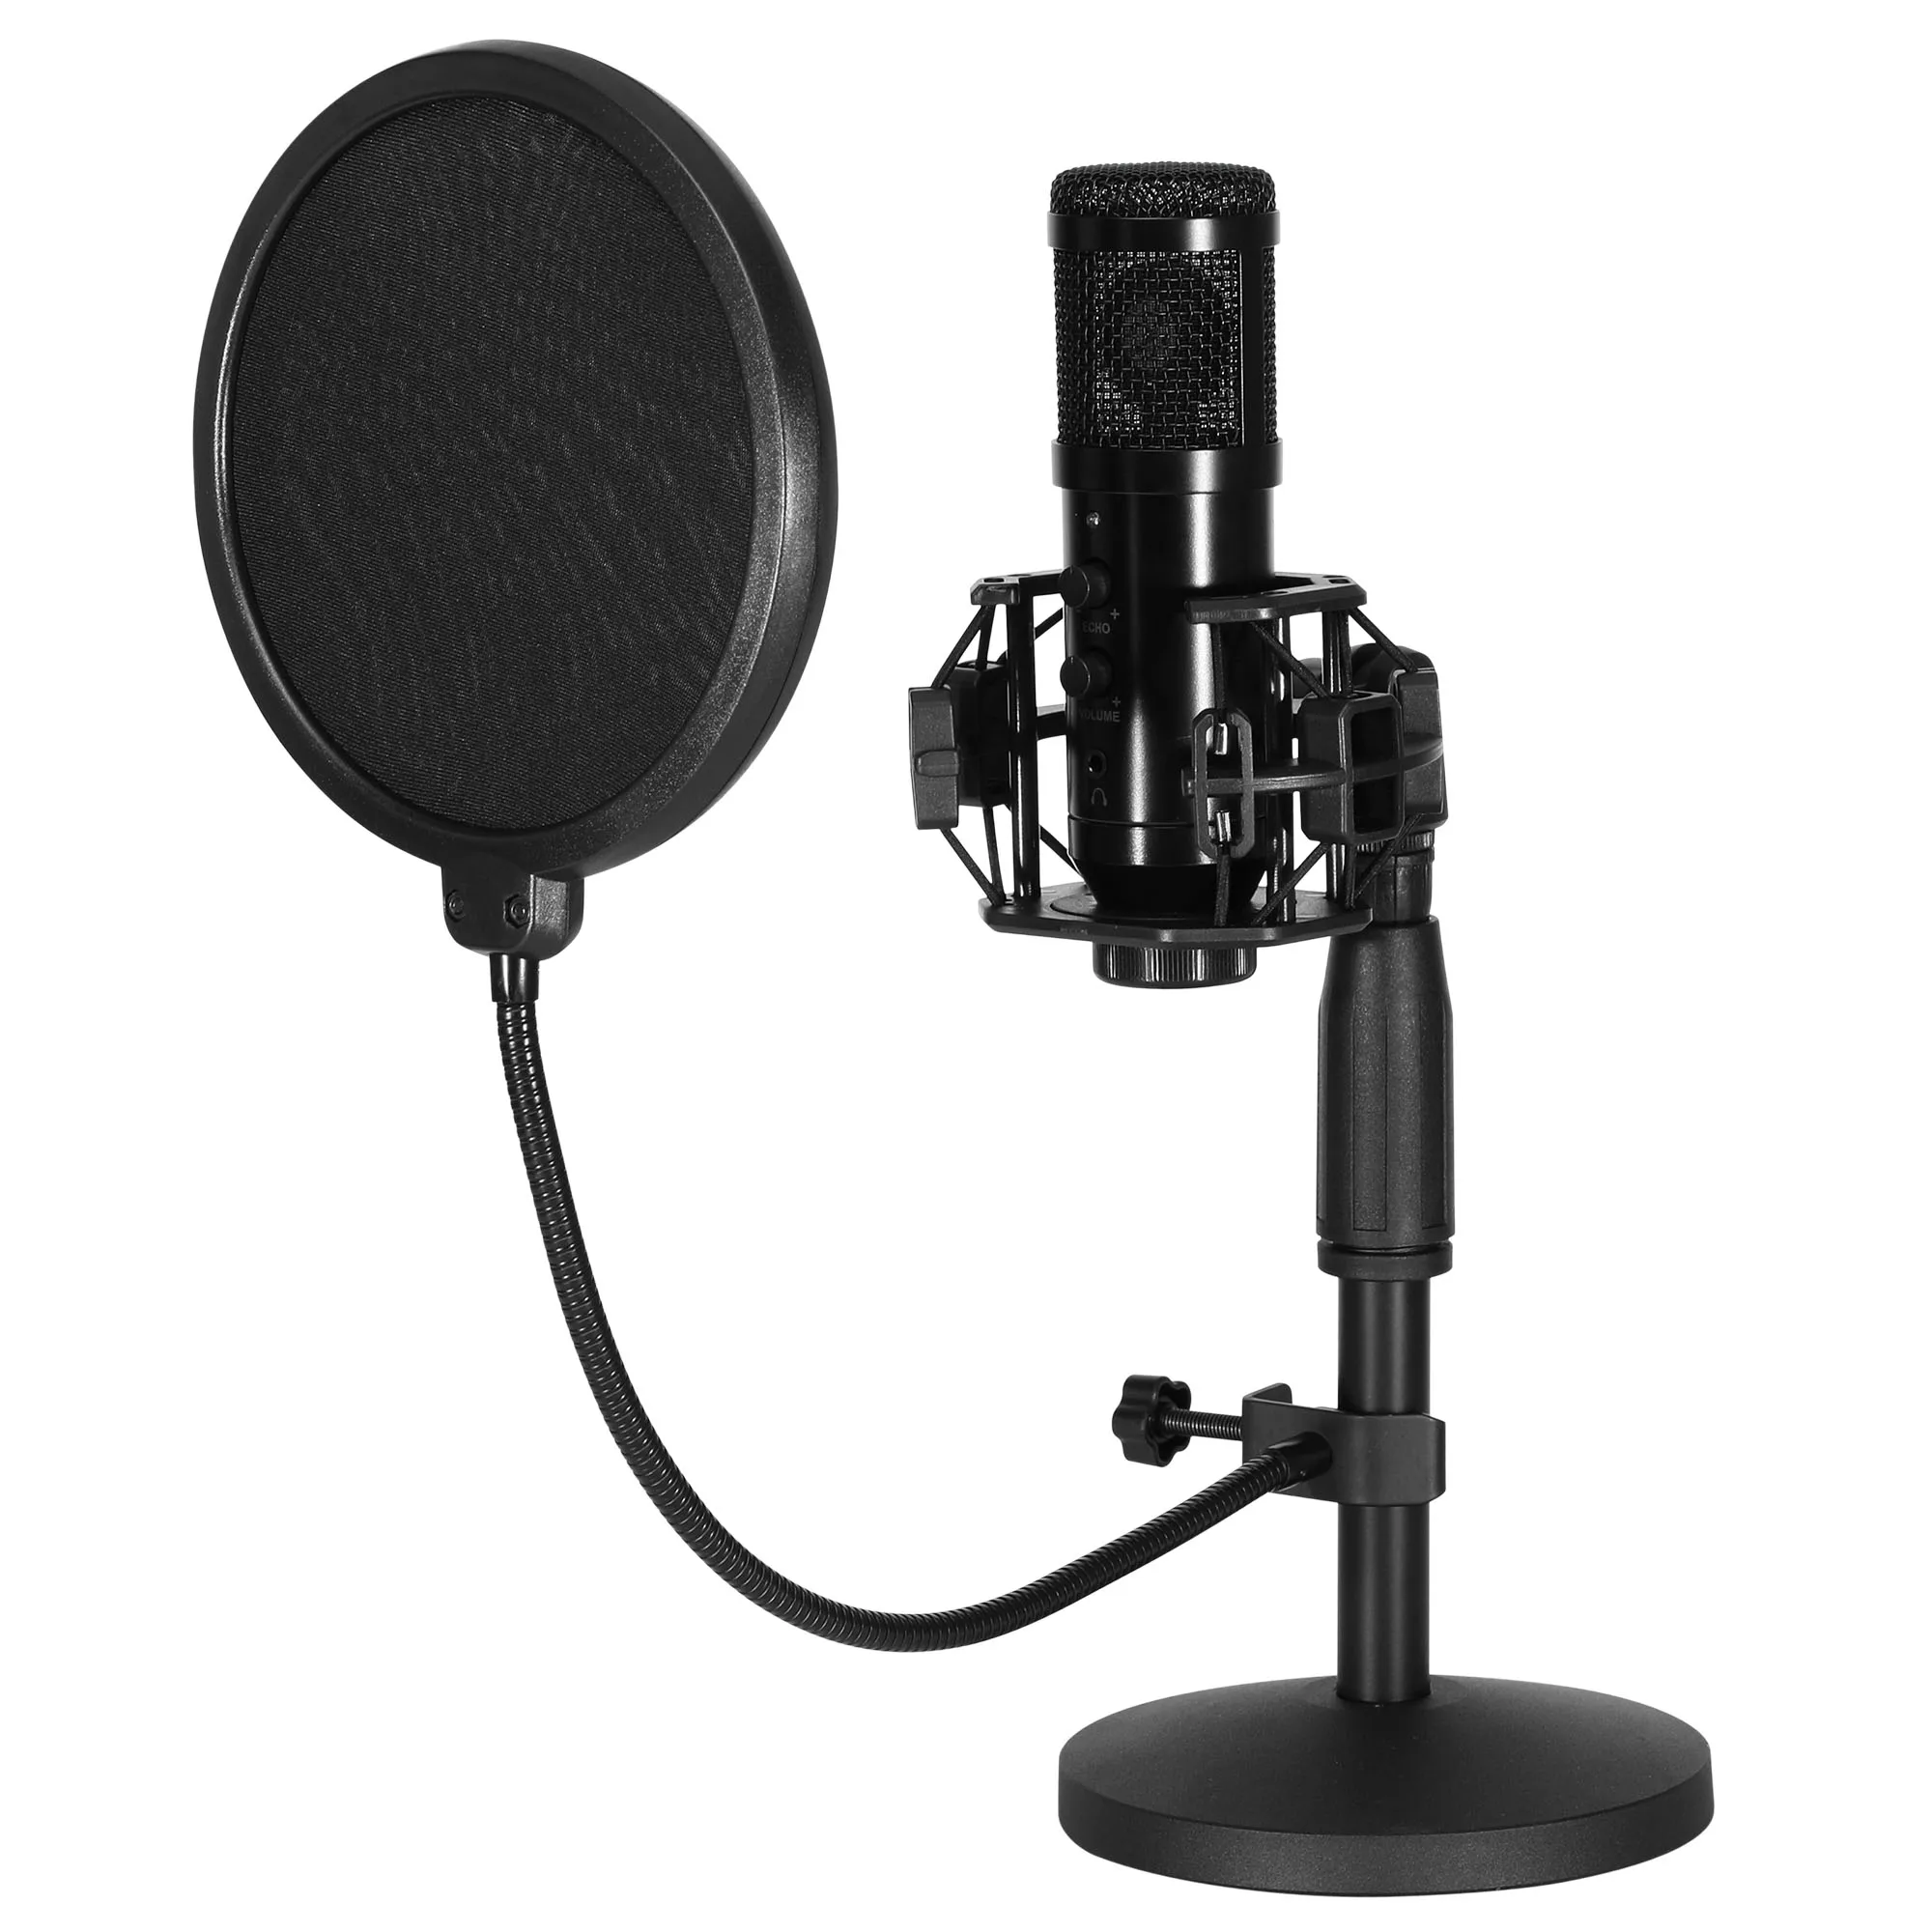 

Professional USB Microphone bm800 condenser mic shock mount stand kit for chats, singing, home studio, gaming recording